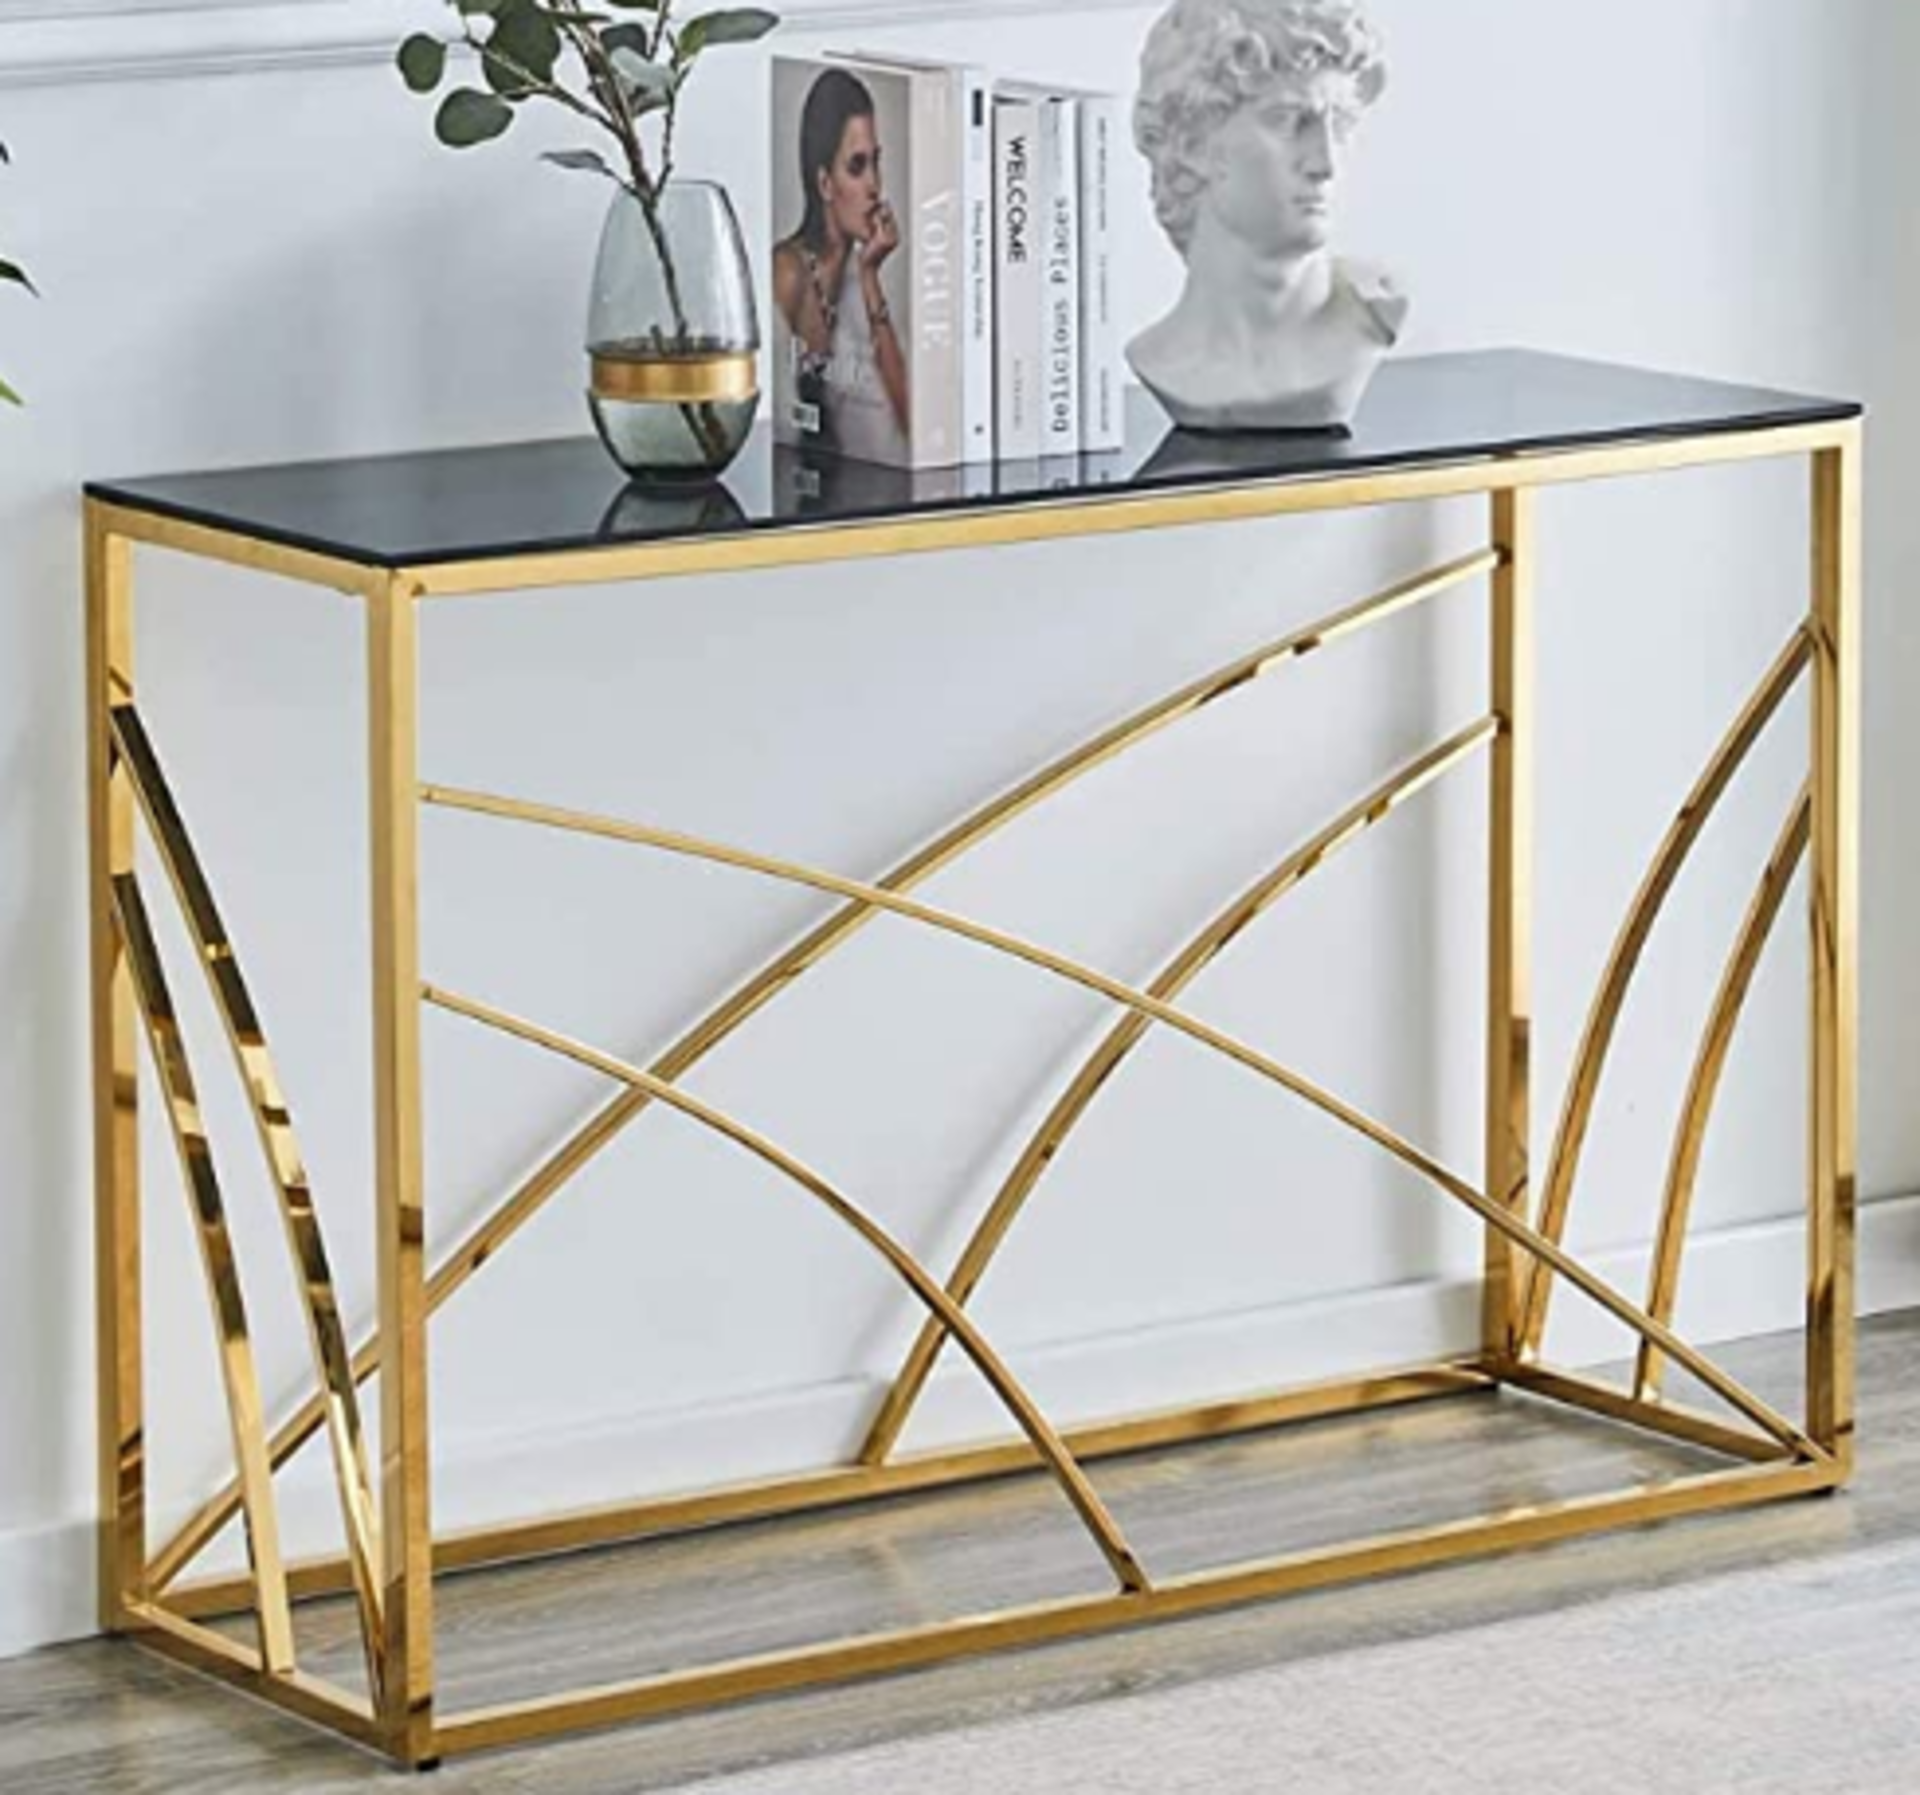 BRAND NEW STAINLESS STEEL CONSOLE TABLE WITH A GLASS TOP IN GOLD 120CM (JHAS55G) RRP £229